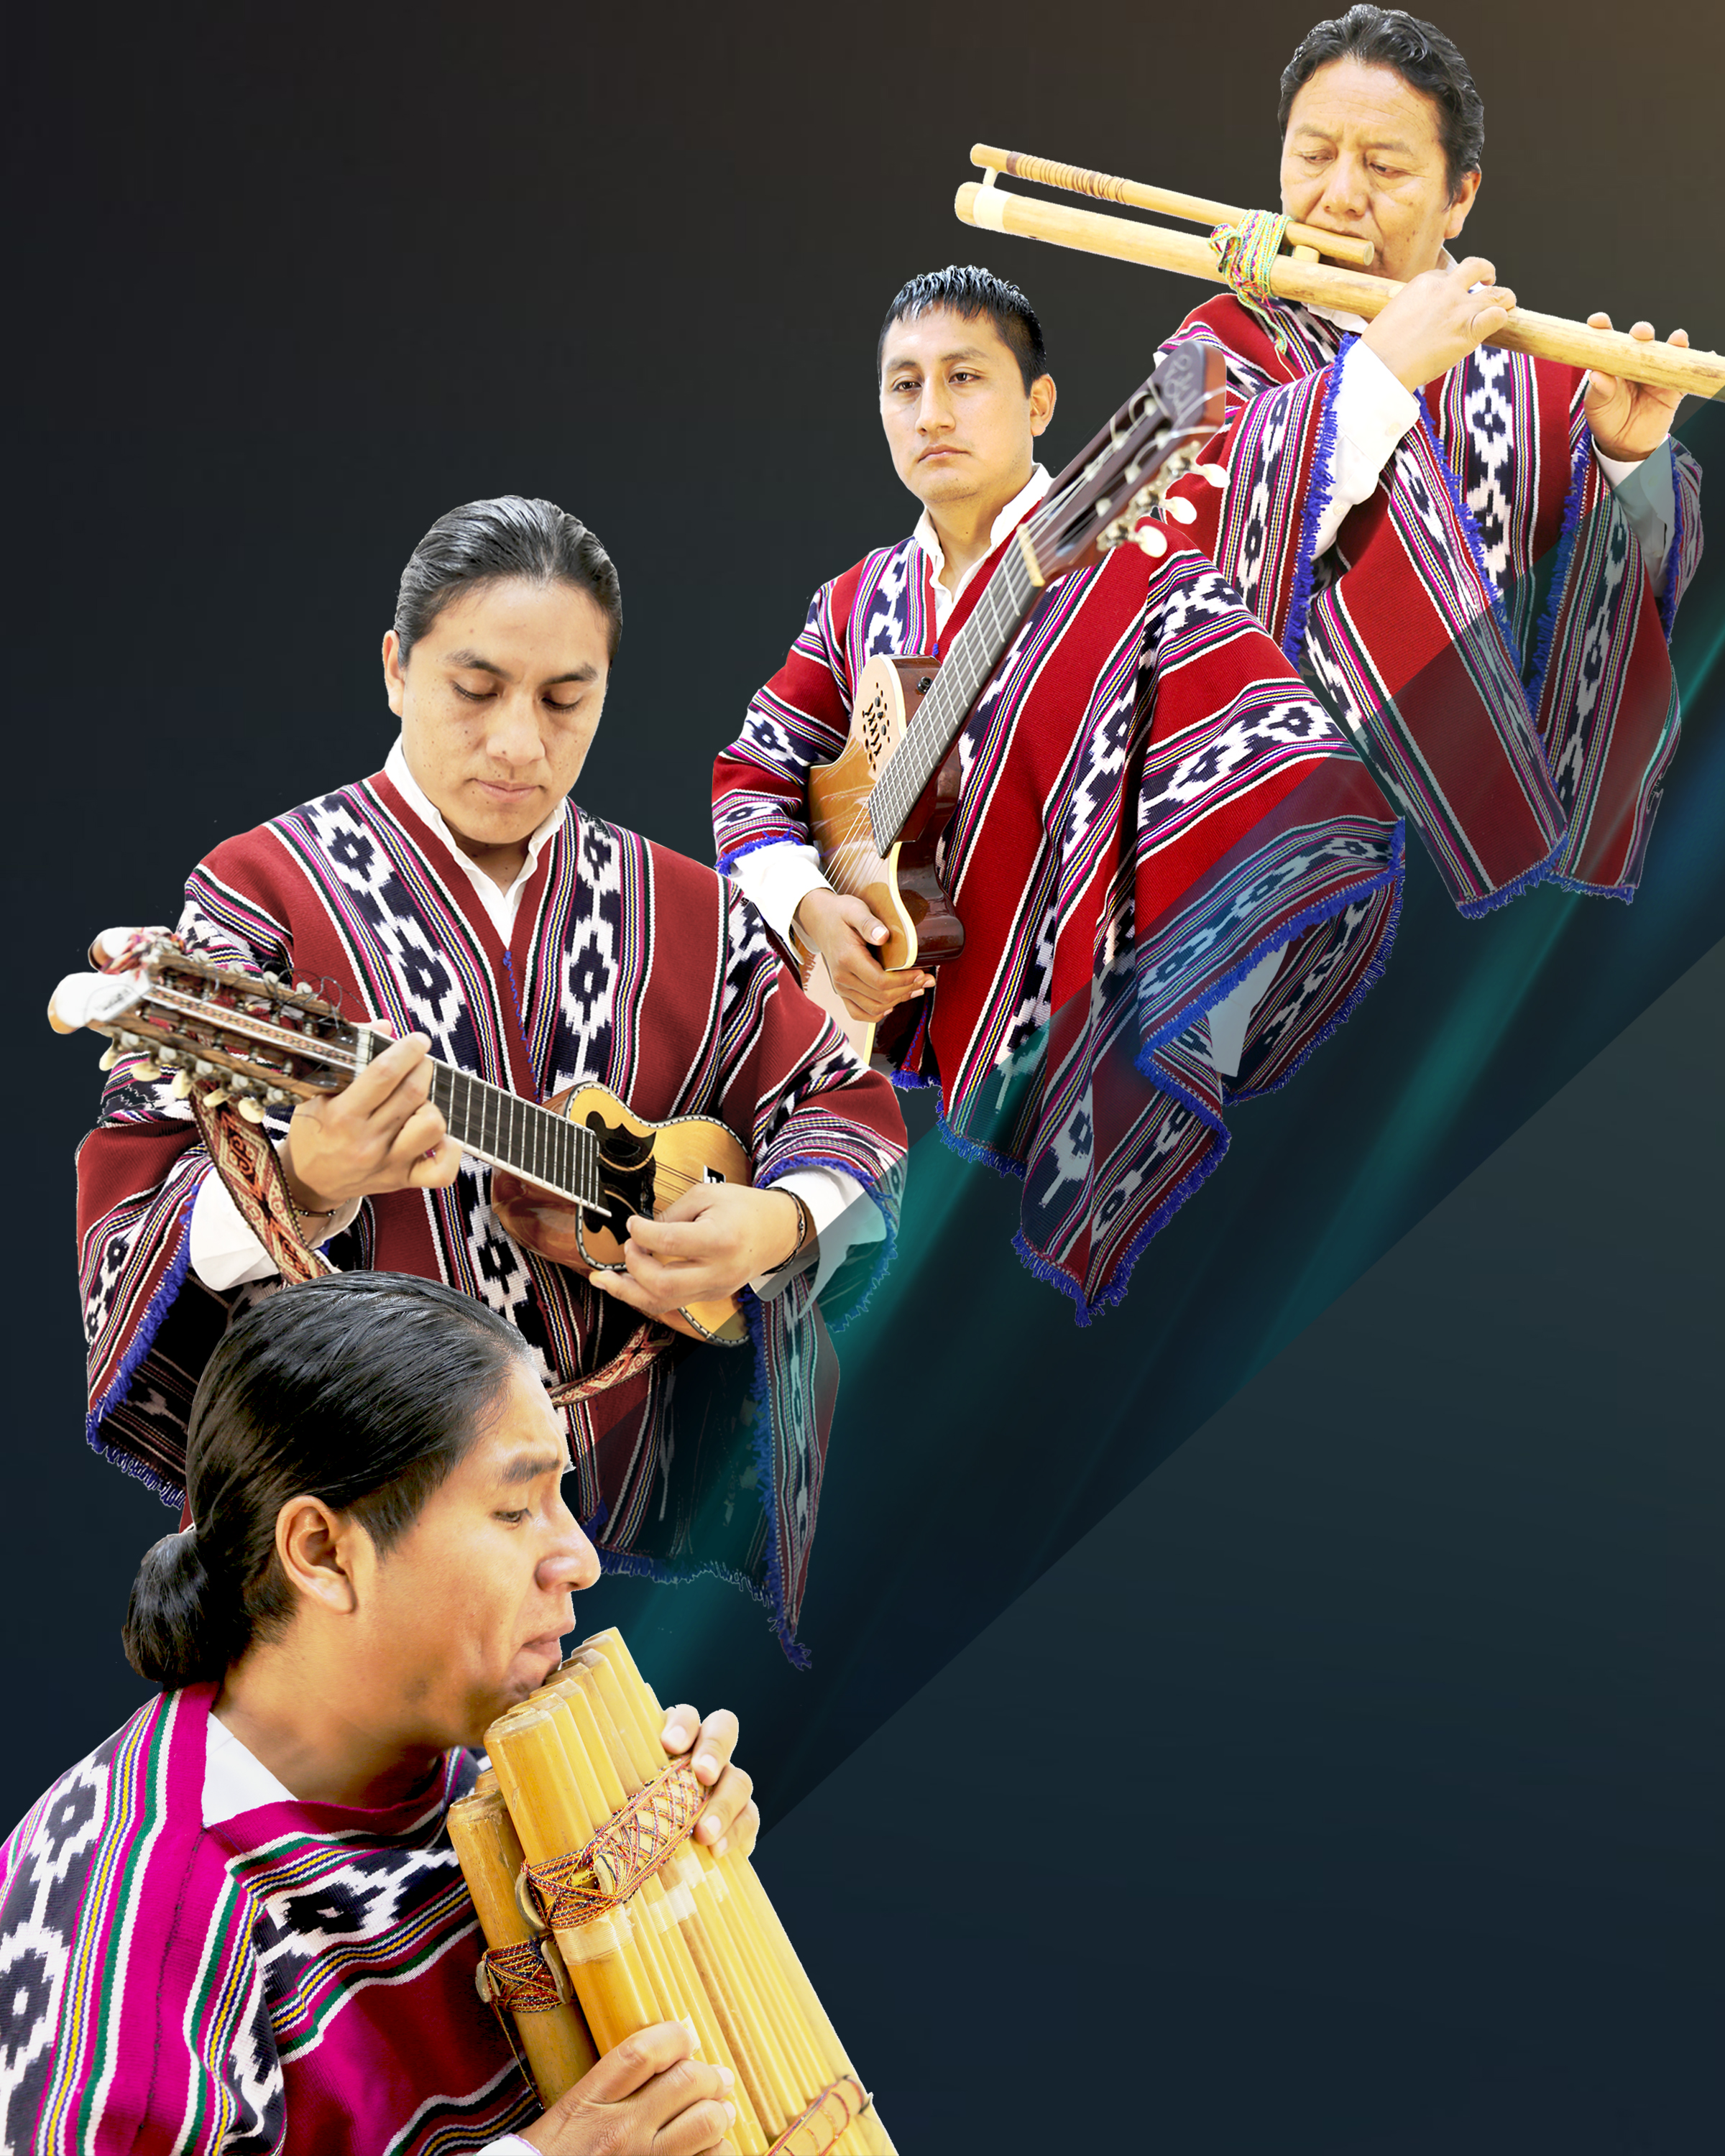 Photo of musicians playing traditional Andean flutes and other instruments.